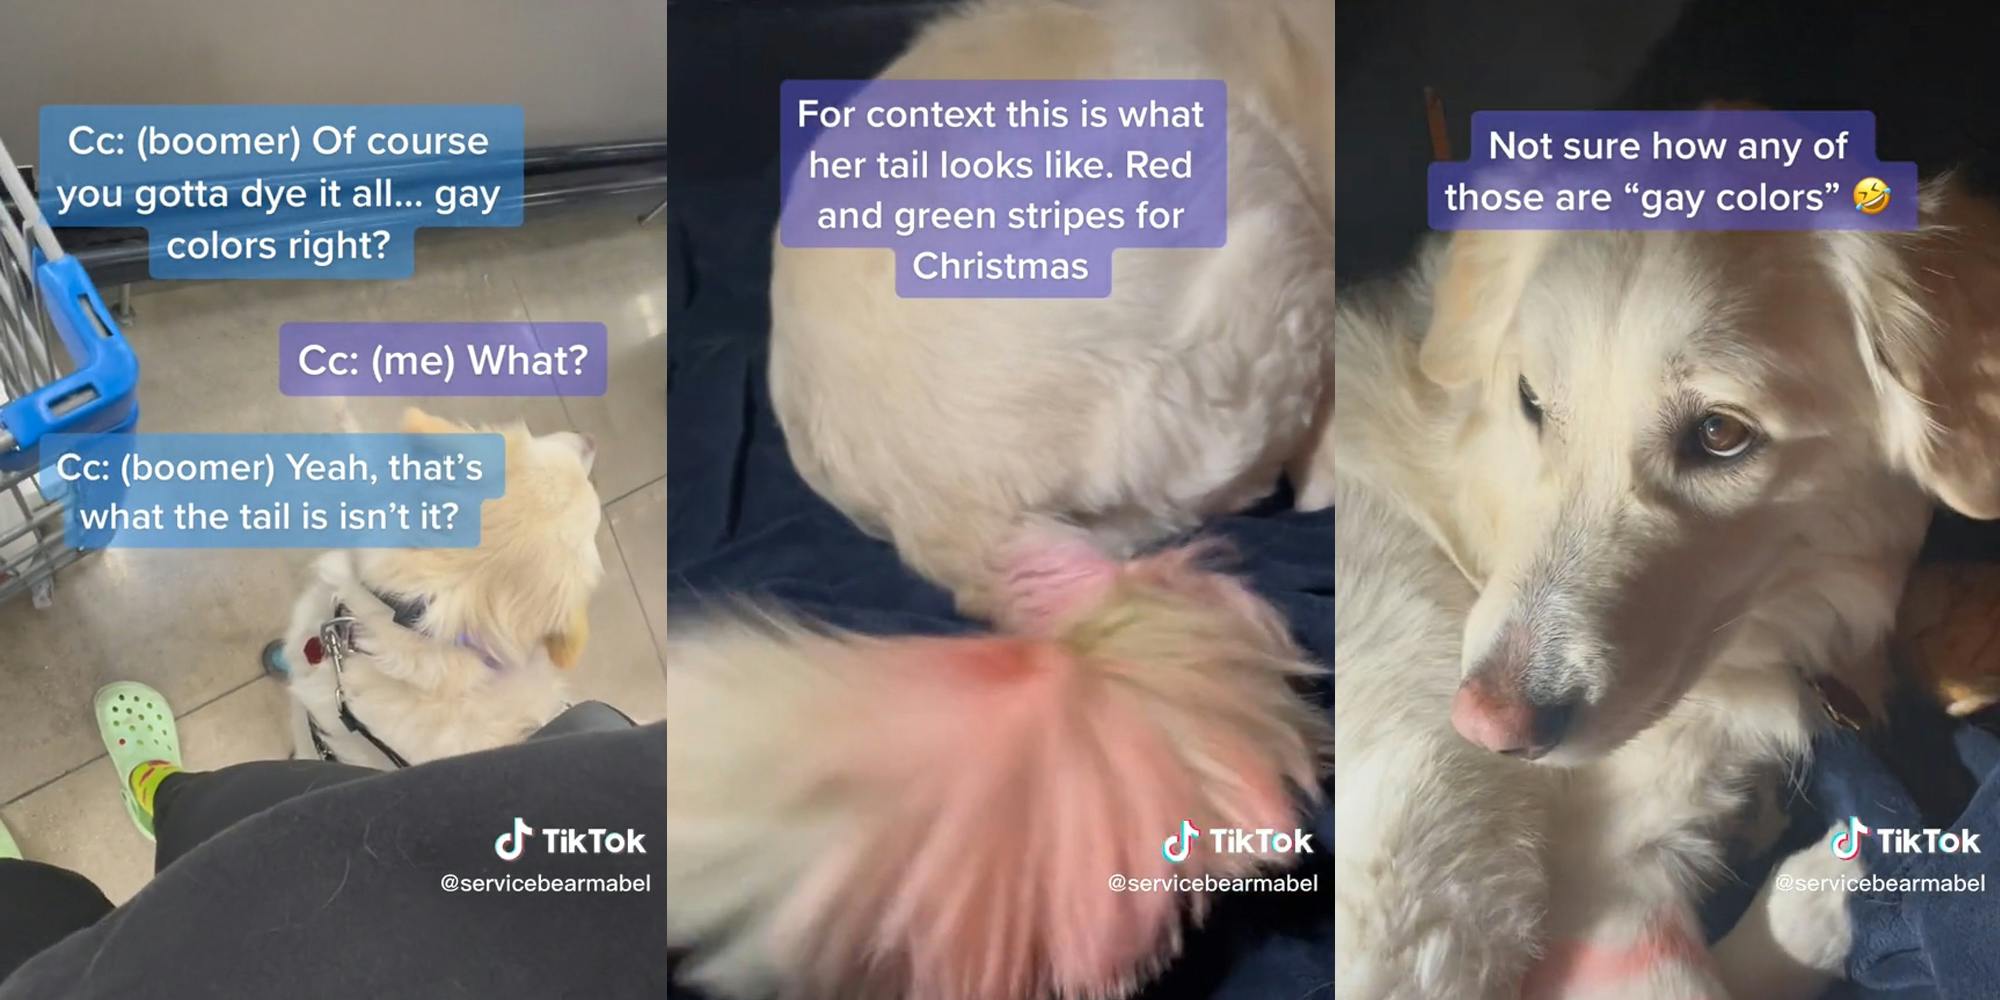 man in store thinks dog's red and green tail is dyed "gay colors"